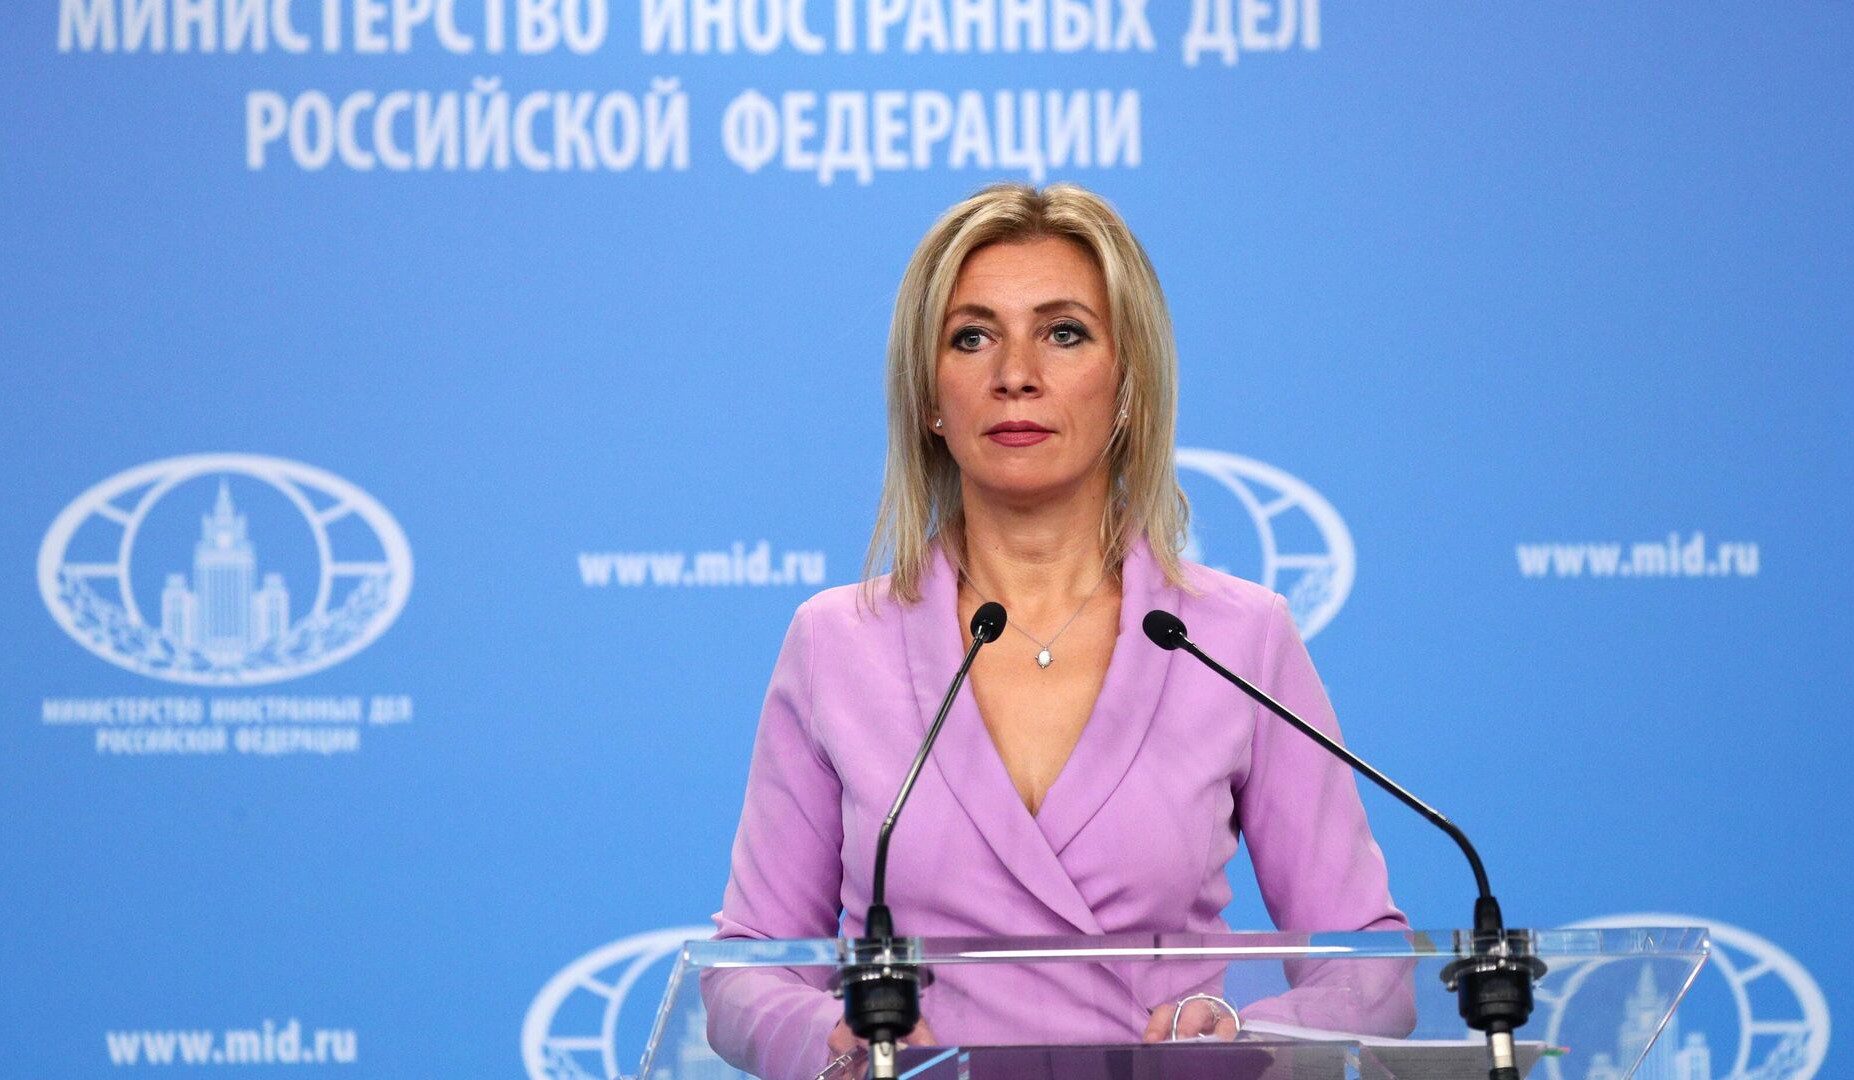 The issue of launching the Stepanakert airport is not a matter of Russia's jurisdiction, Zakharova